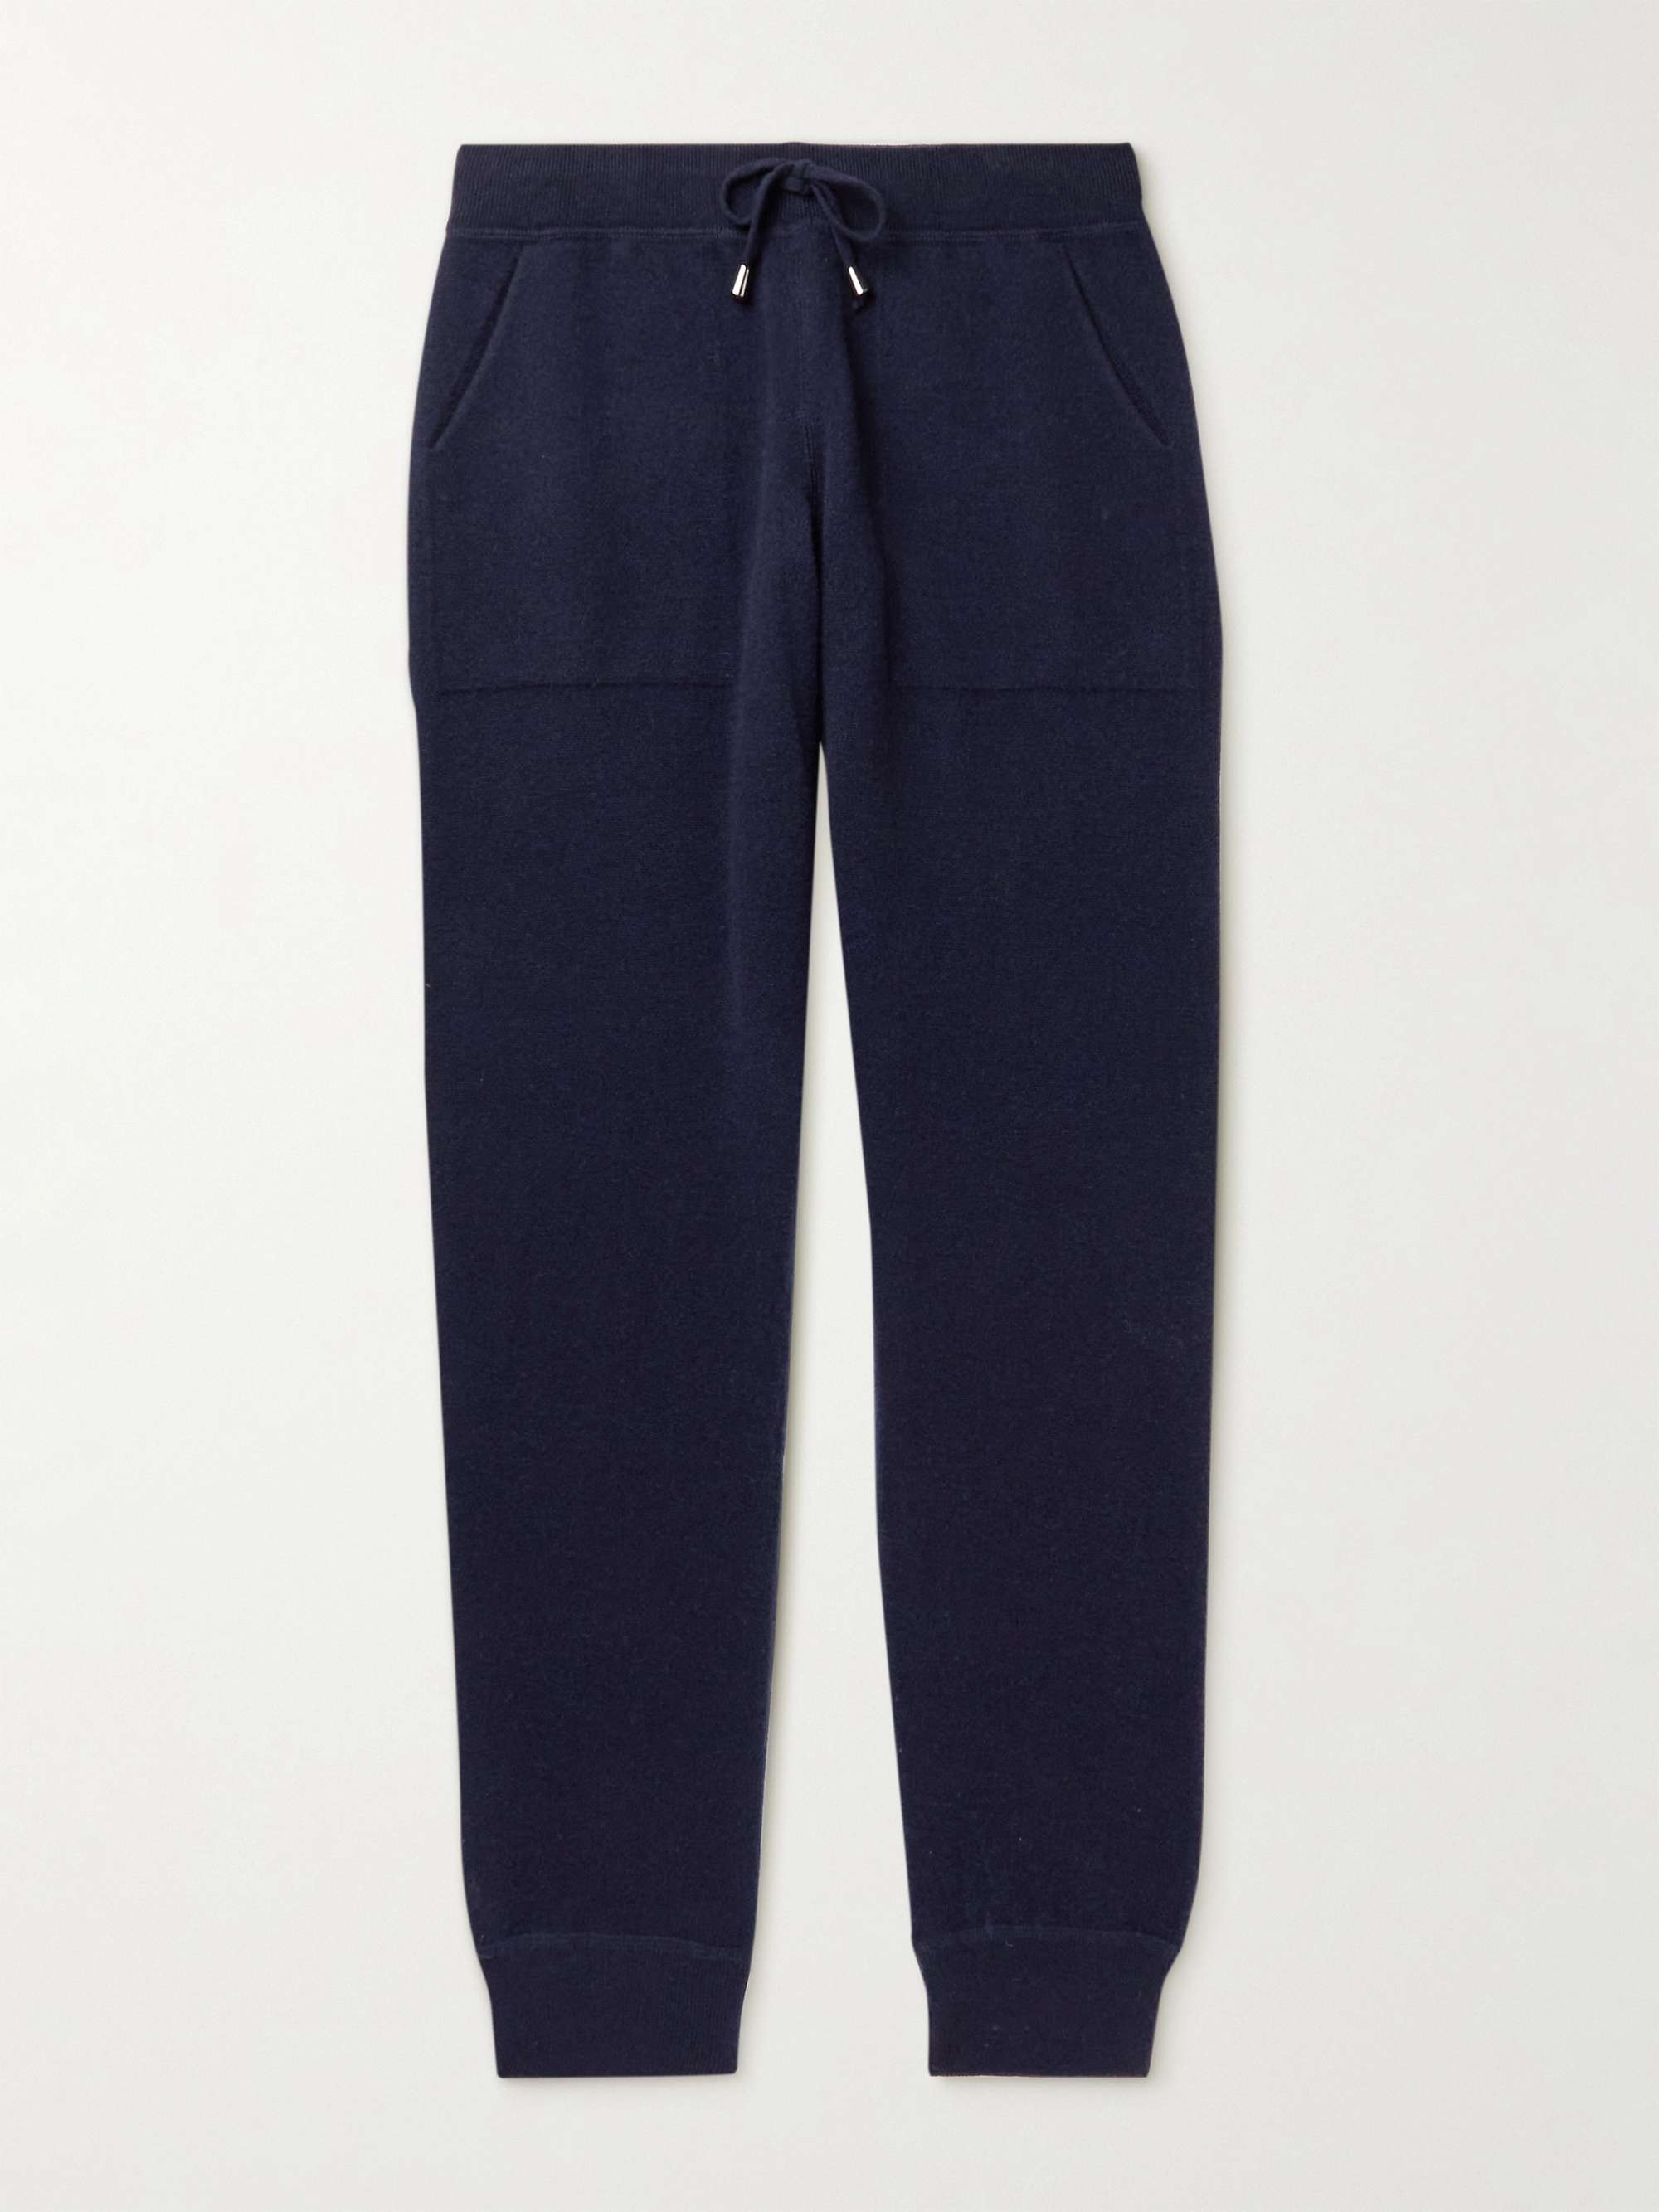 THOM SWEENEY Tapered Wool and Cashmere-Blend Sweatpants